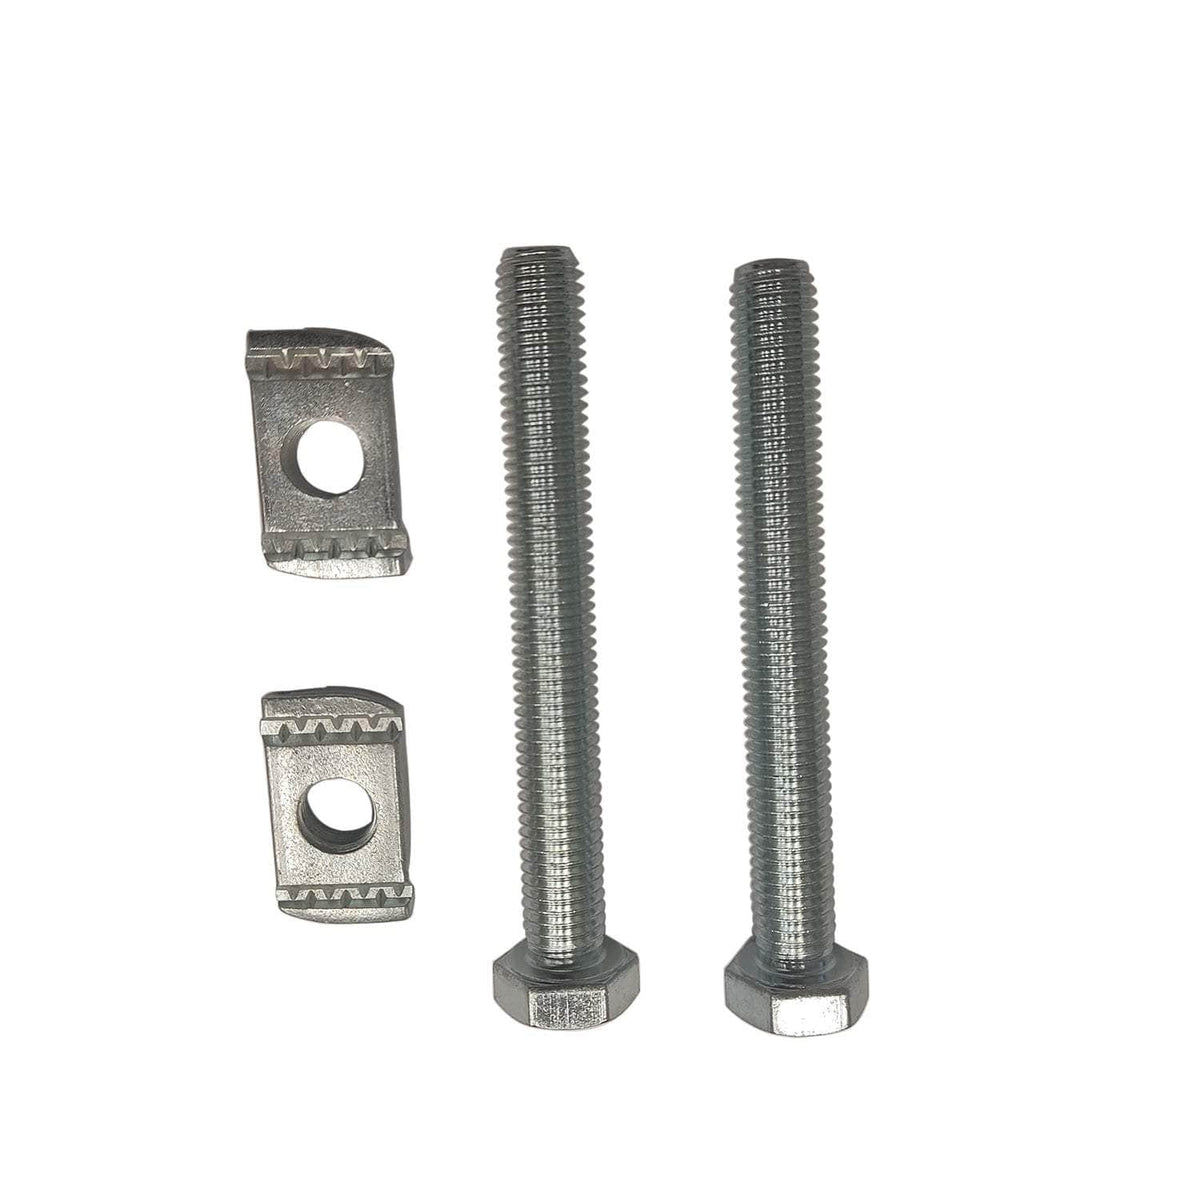 Barrel Adjusting Bolts &amp; Wedge Nuts (pair) for use with Aga range cookers